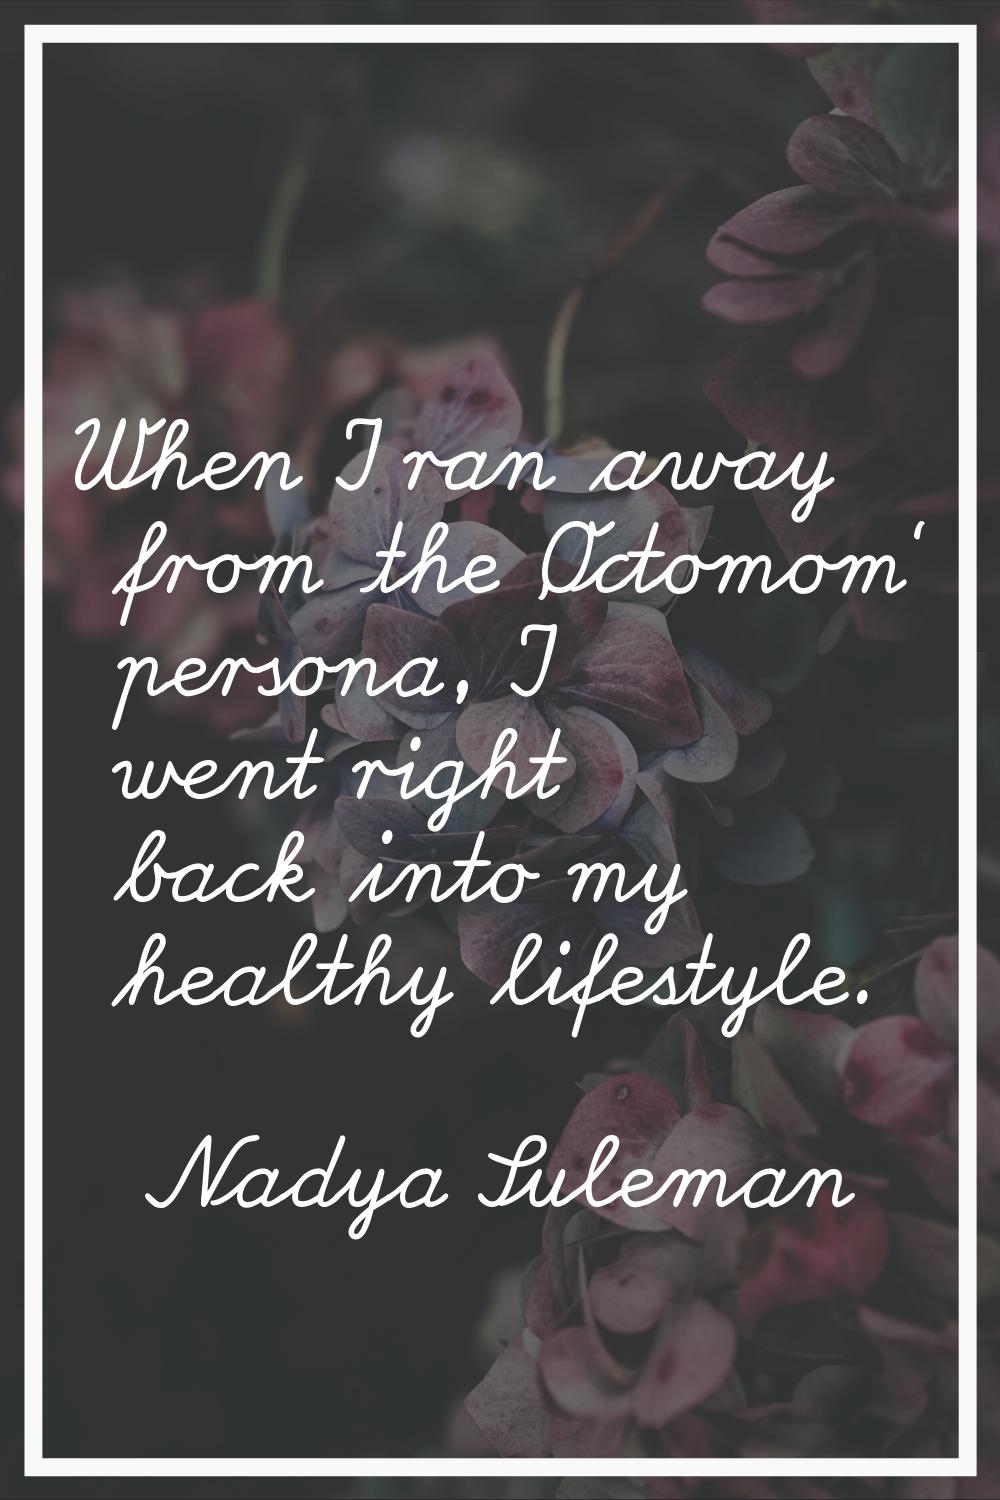 When I ran away from the 'Octomom' persona, I went right back into my healthy lifestyle.